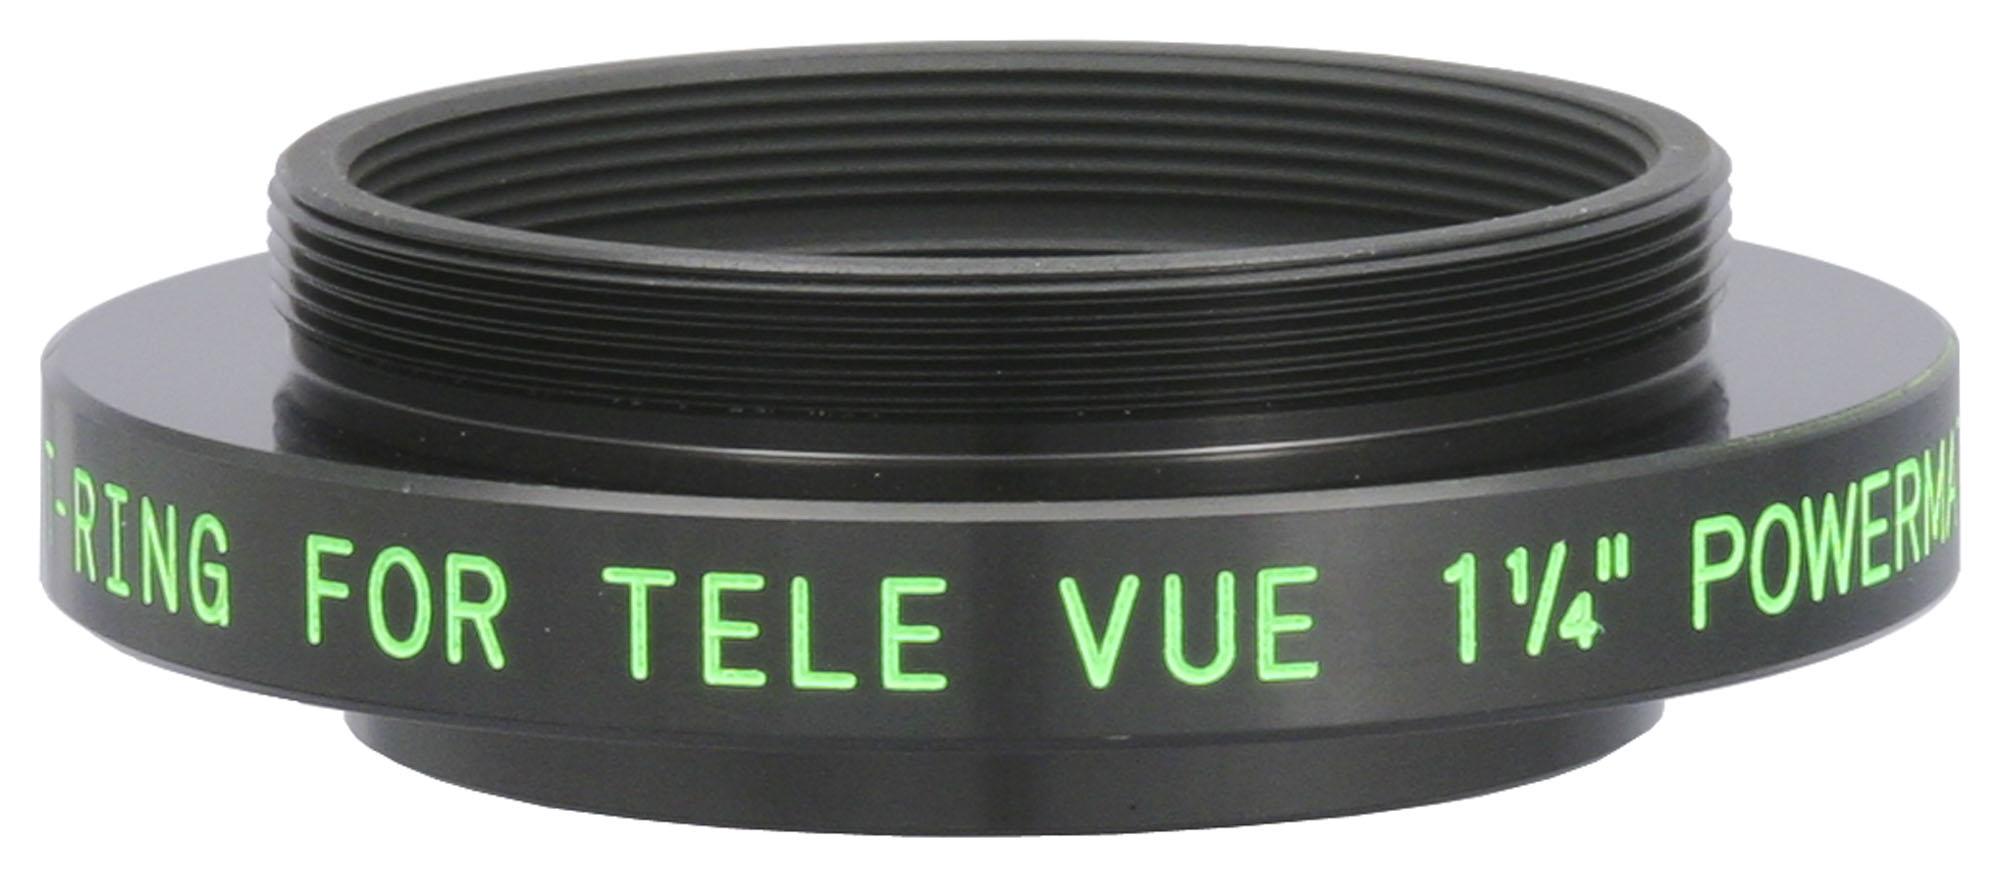 Televue 1¼” PMT T-Ring Adapter